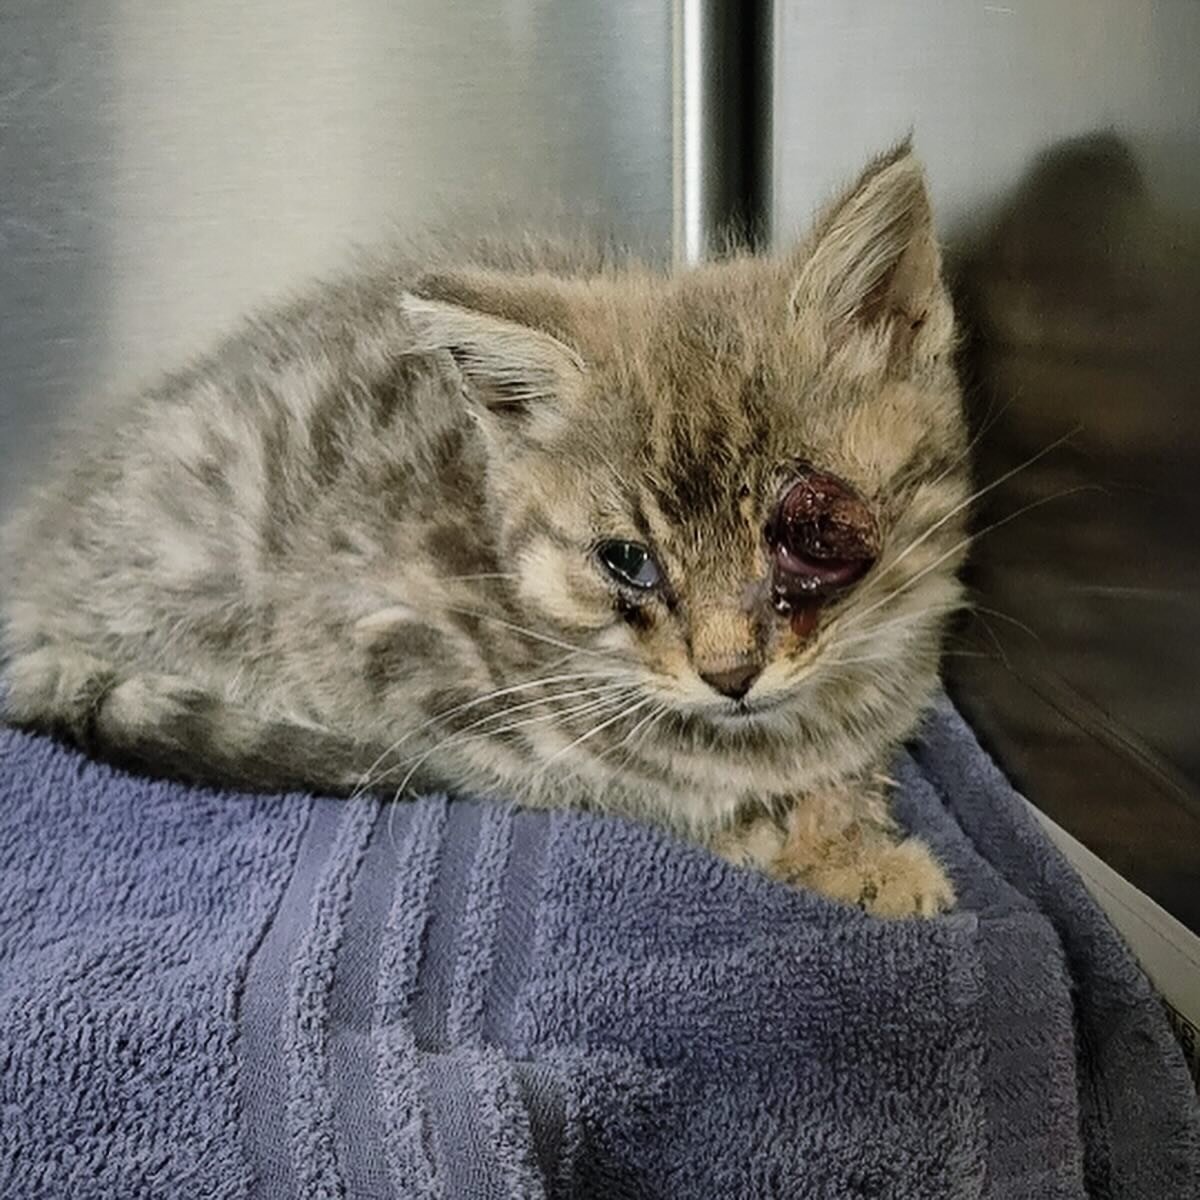 Donate to help sweet Mazrith receive surgery. ❤️
This sweet kitten was found with one of its eyes severely infected after it was hurt. The eye must be removed so Mazrith can heal &amp; live out a happy, healthy life indoors. We are asking for donatio